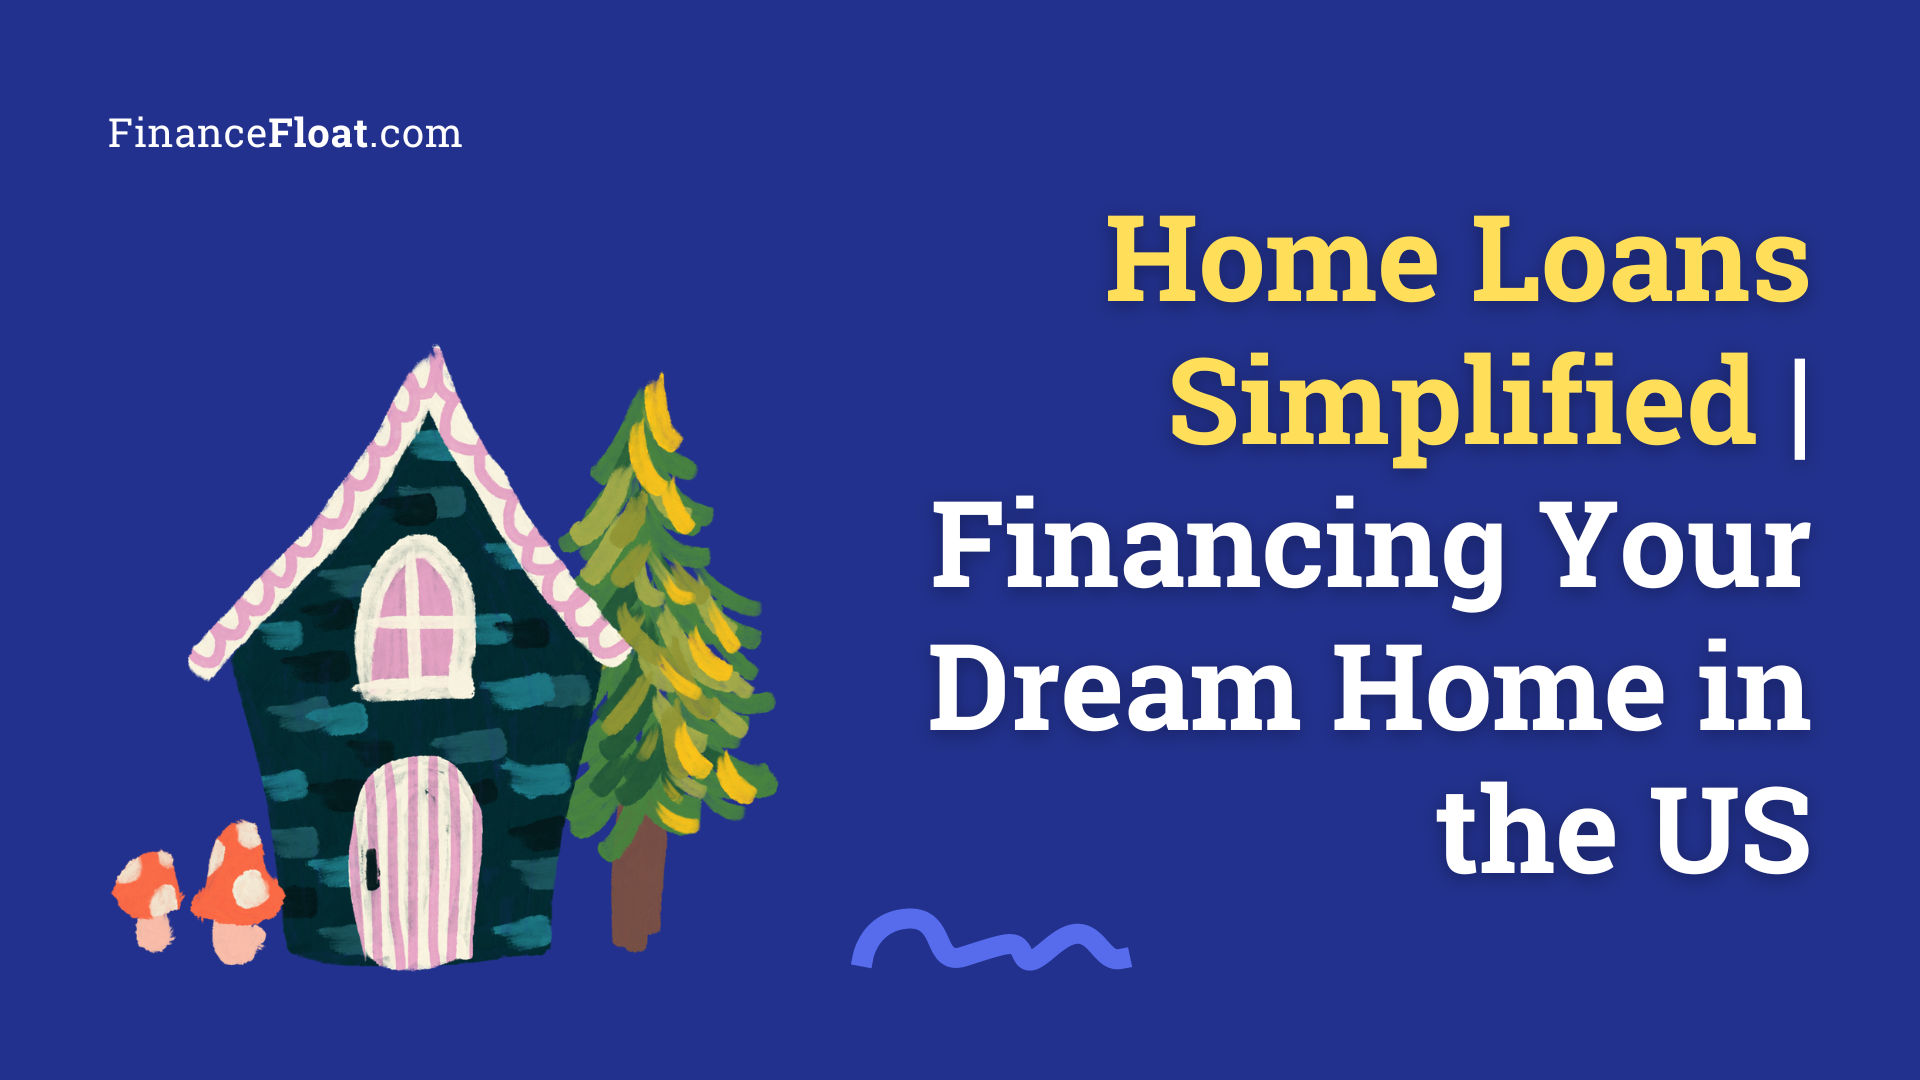 Home Loans Simplified Financing Your Dream Home in the US